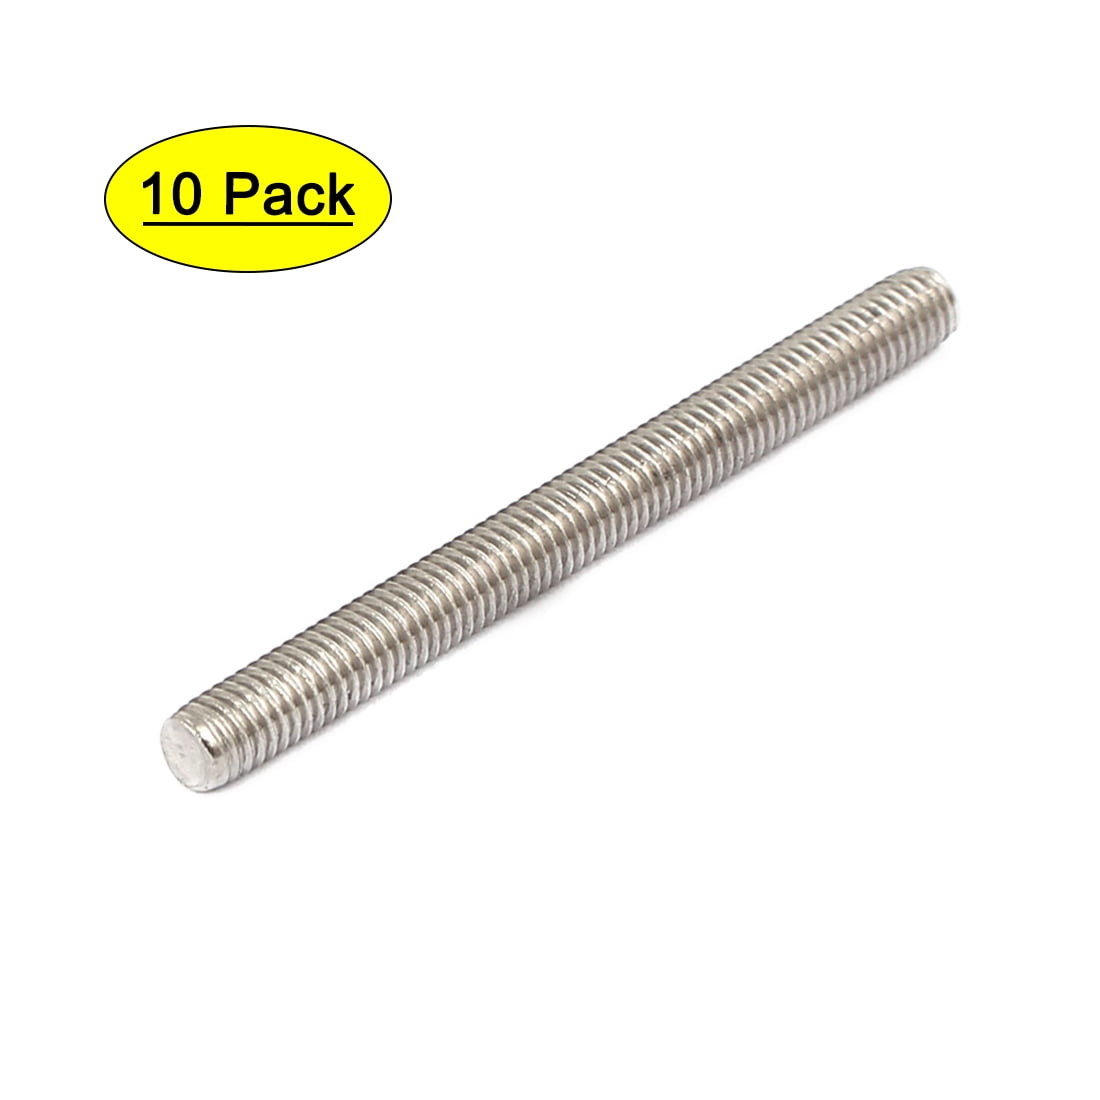 M2 M3 M4 M5 M6 M8 M10 M12 All Thread Threaded Rod Bar Studs 304 Stainless Steel 